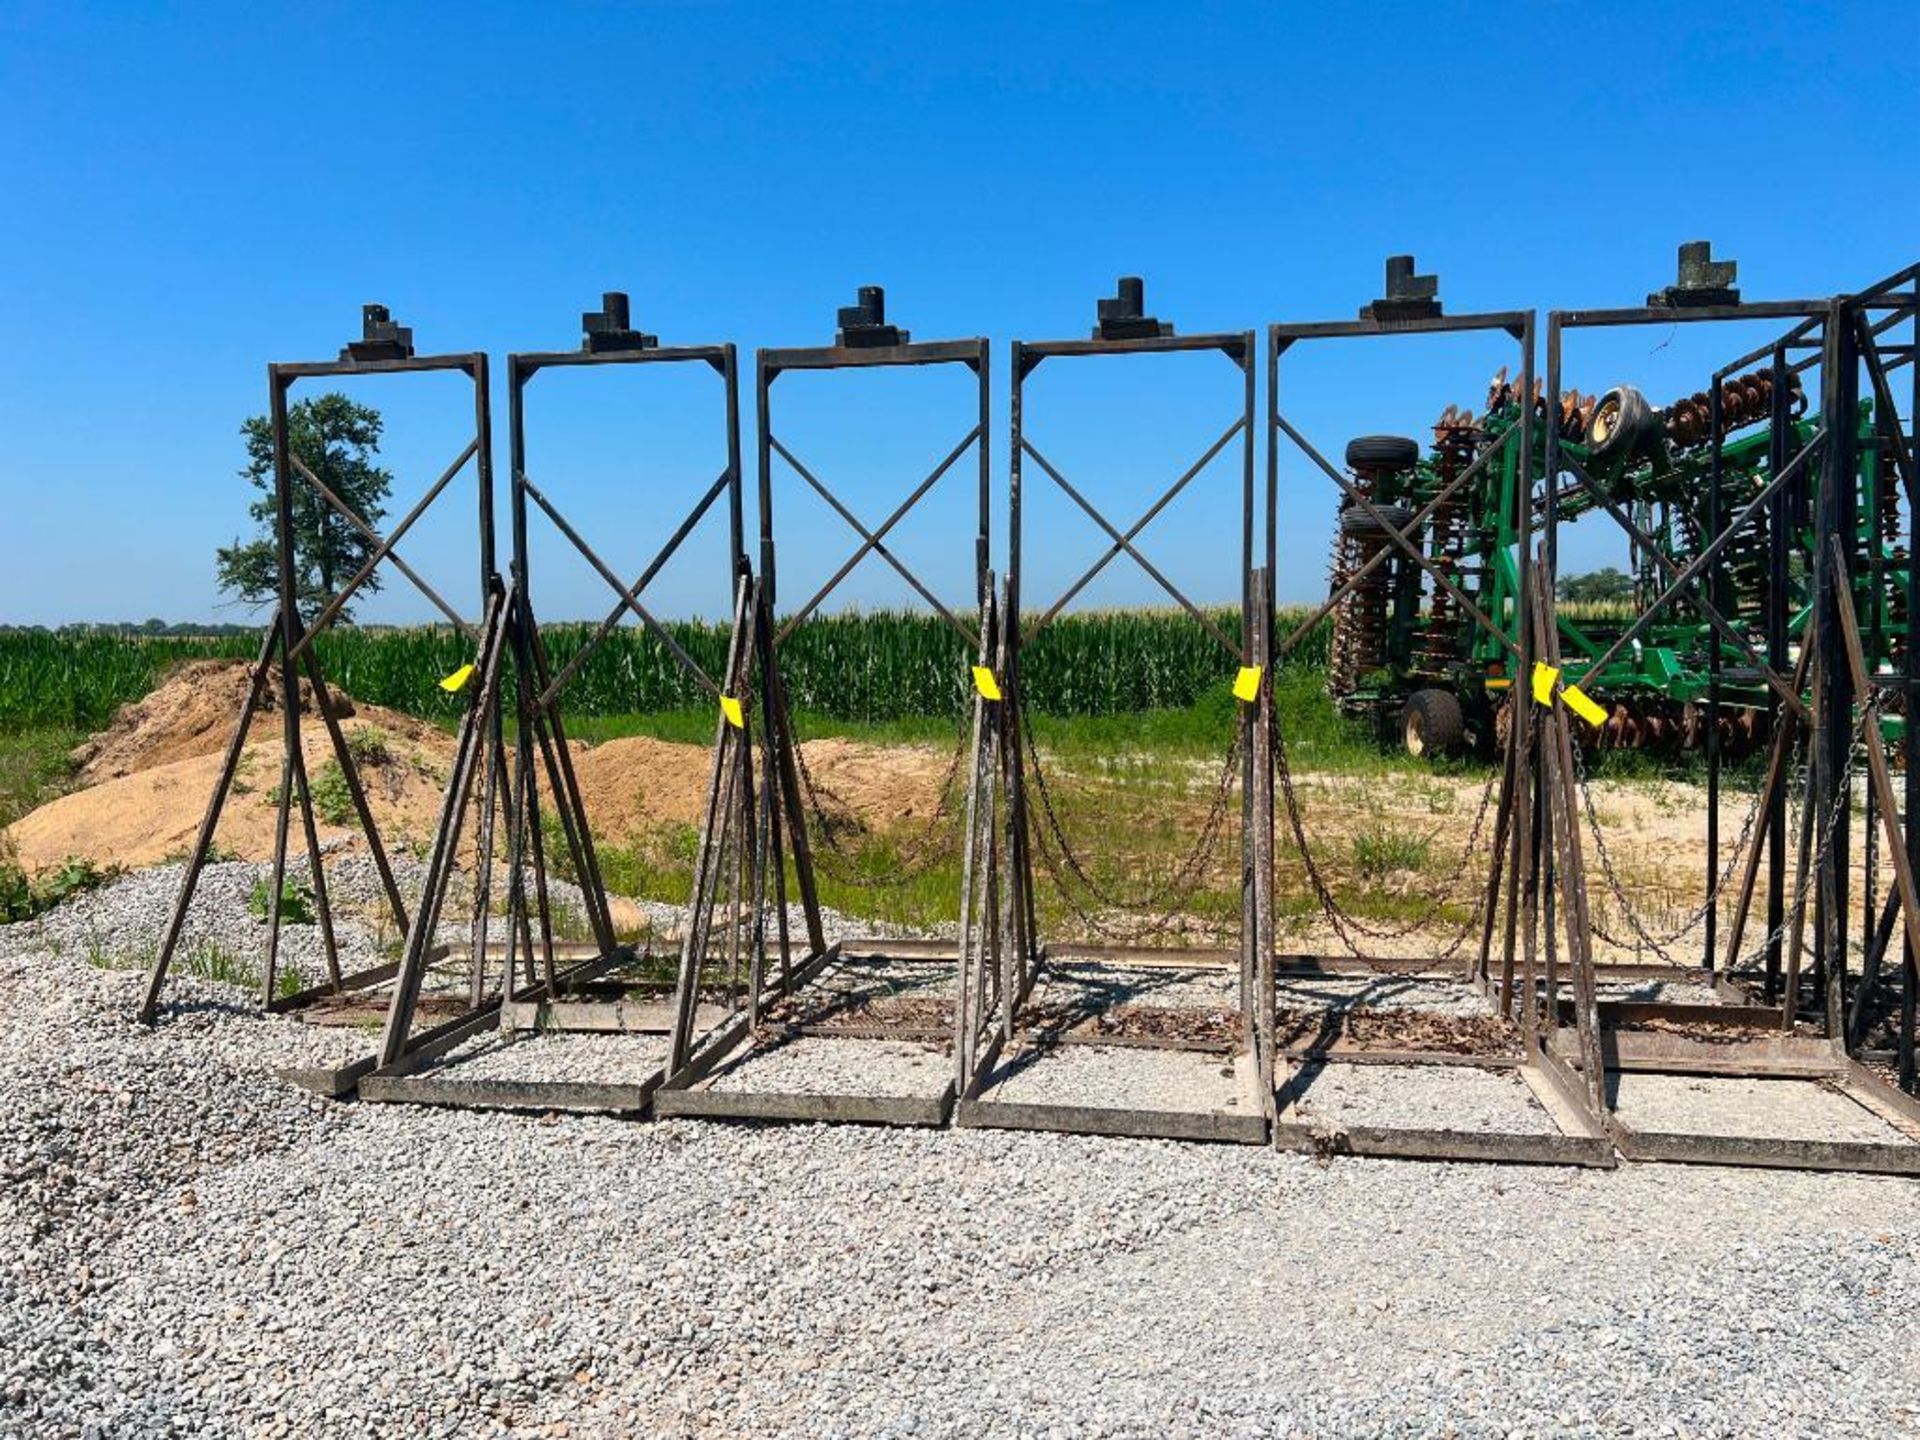 9' x 98" x 37 1/2" Form Basket with Bell. Located in Altamont, IL - Image 2 of 2